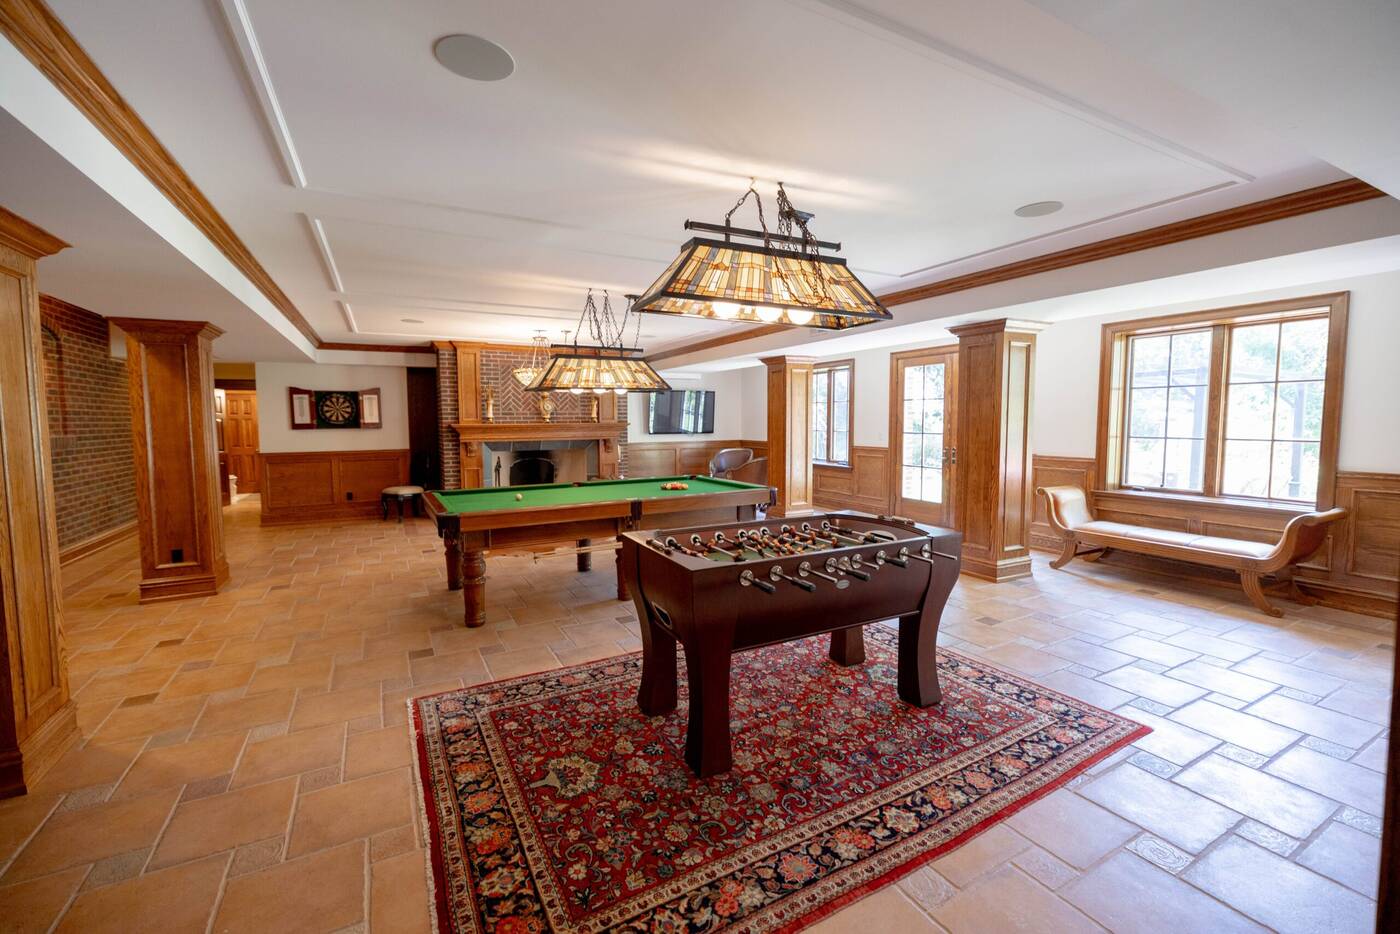 This $8 million Toronto home looks like it's from a different century